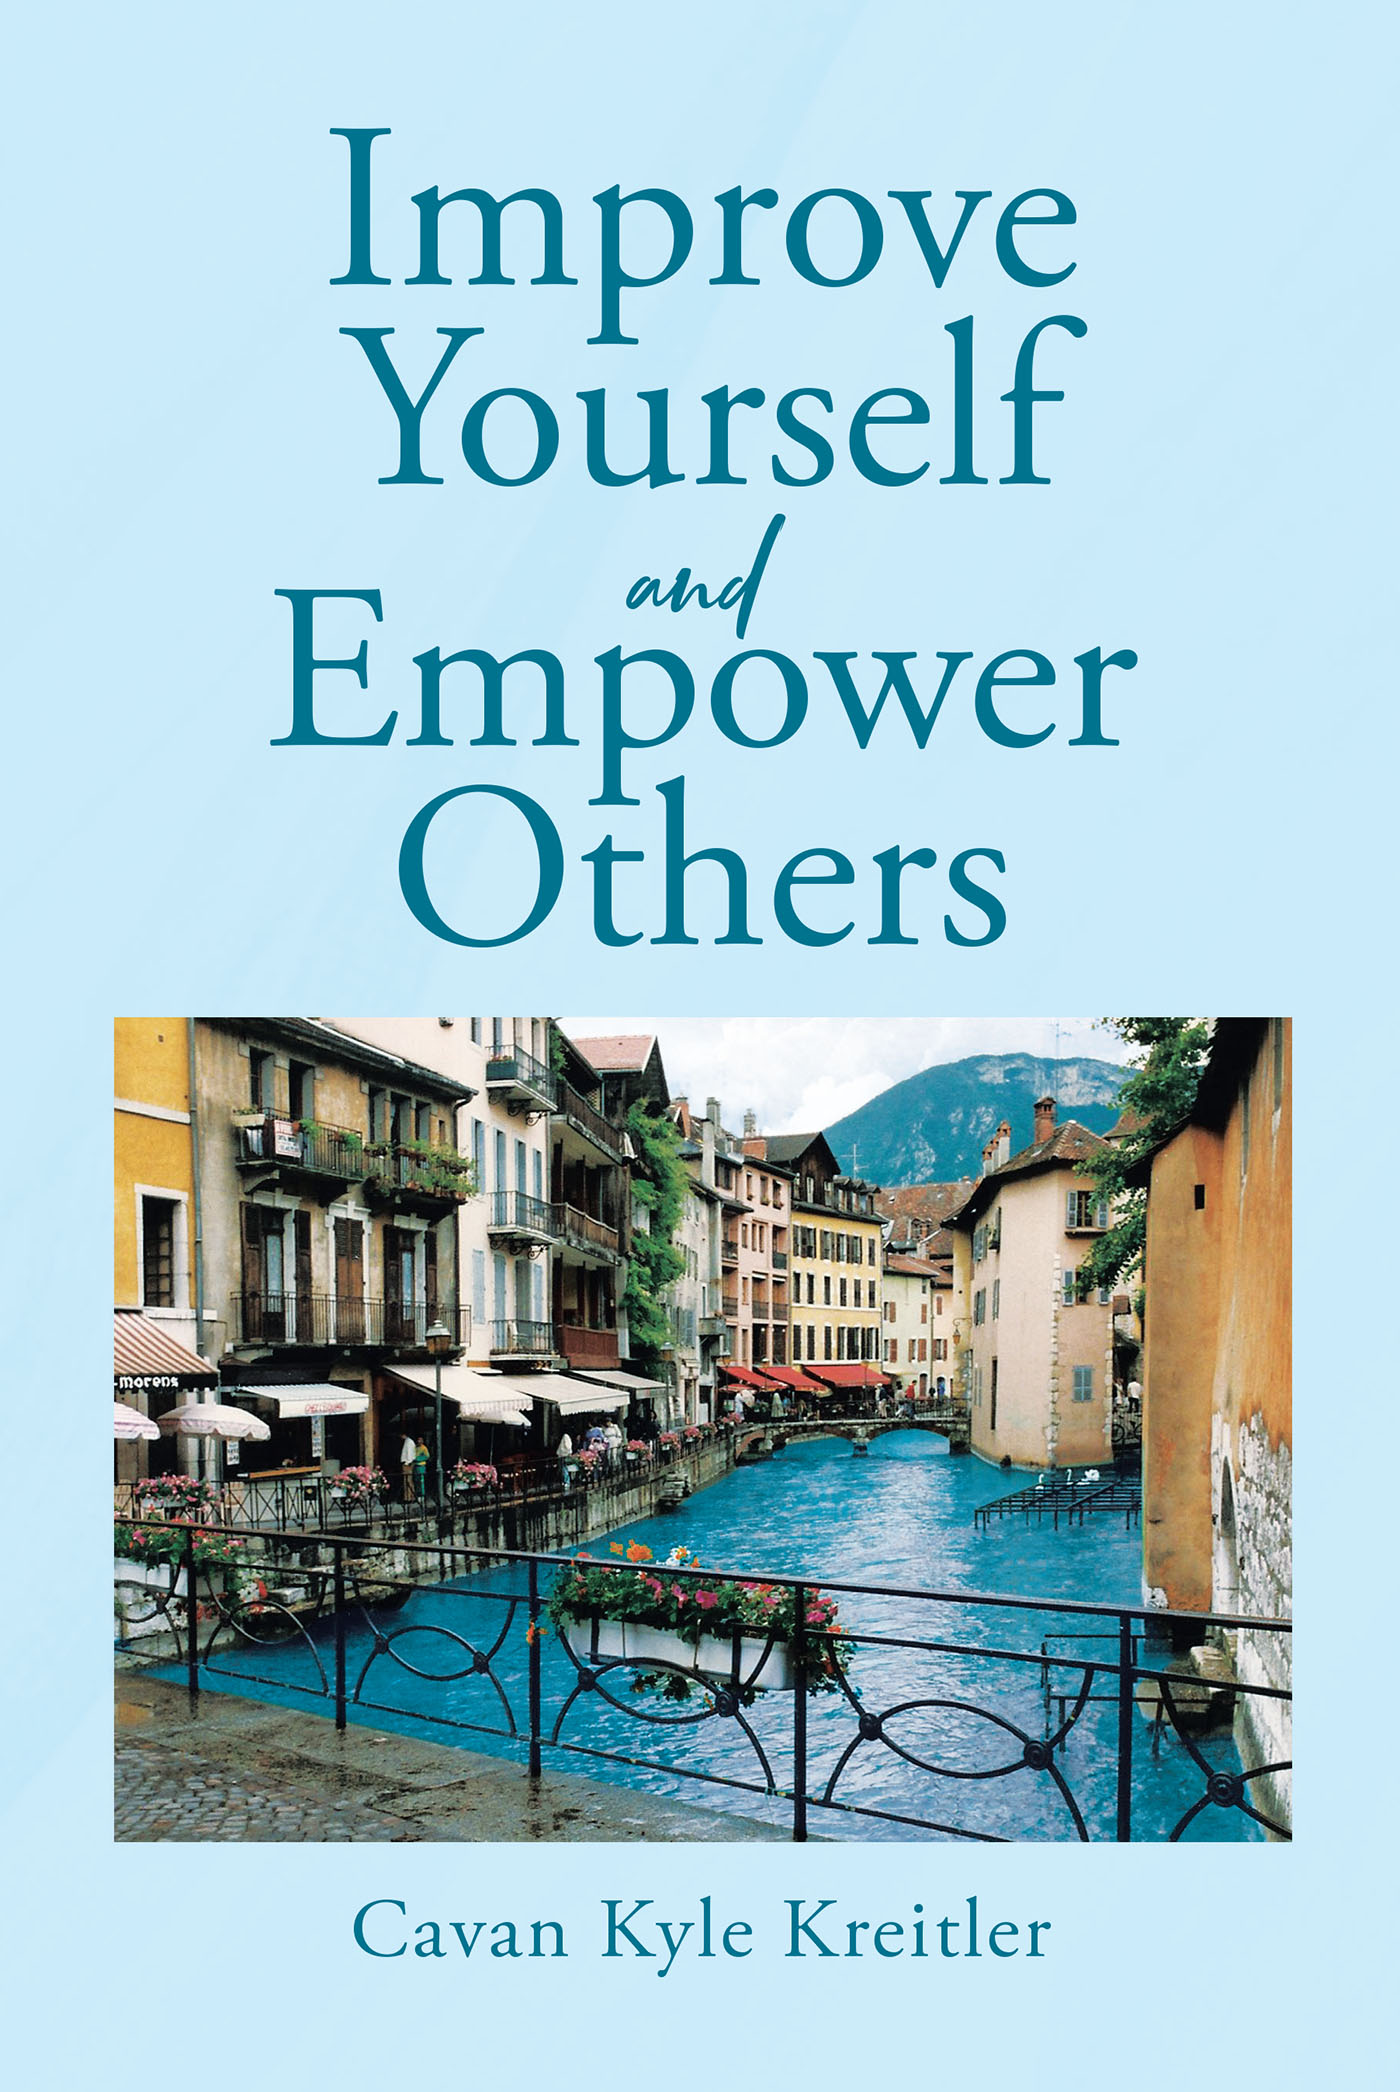 Author Cavan Kyle Kreitler’s New Book, "Improve Yourself and Empower Others," is a Unique Guide That Offers Tips, Recipes, and Tidbits for Every Day of the Year